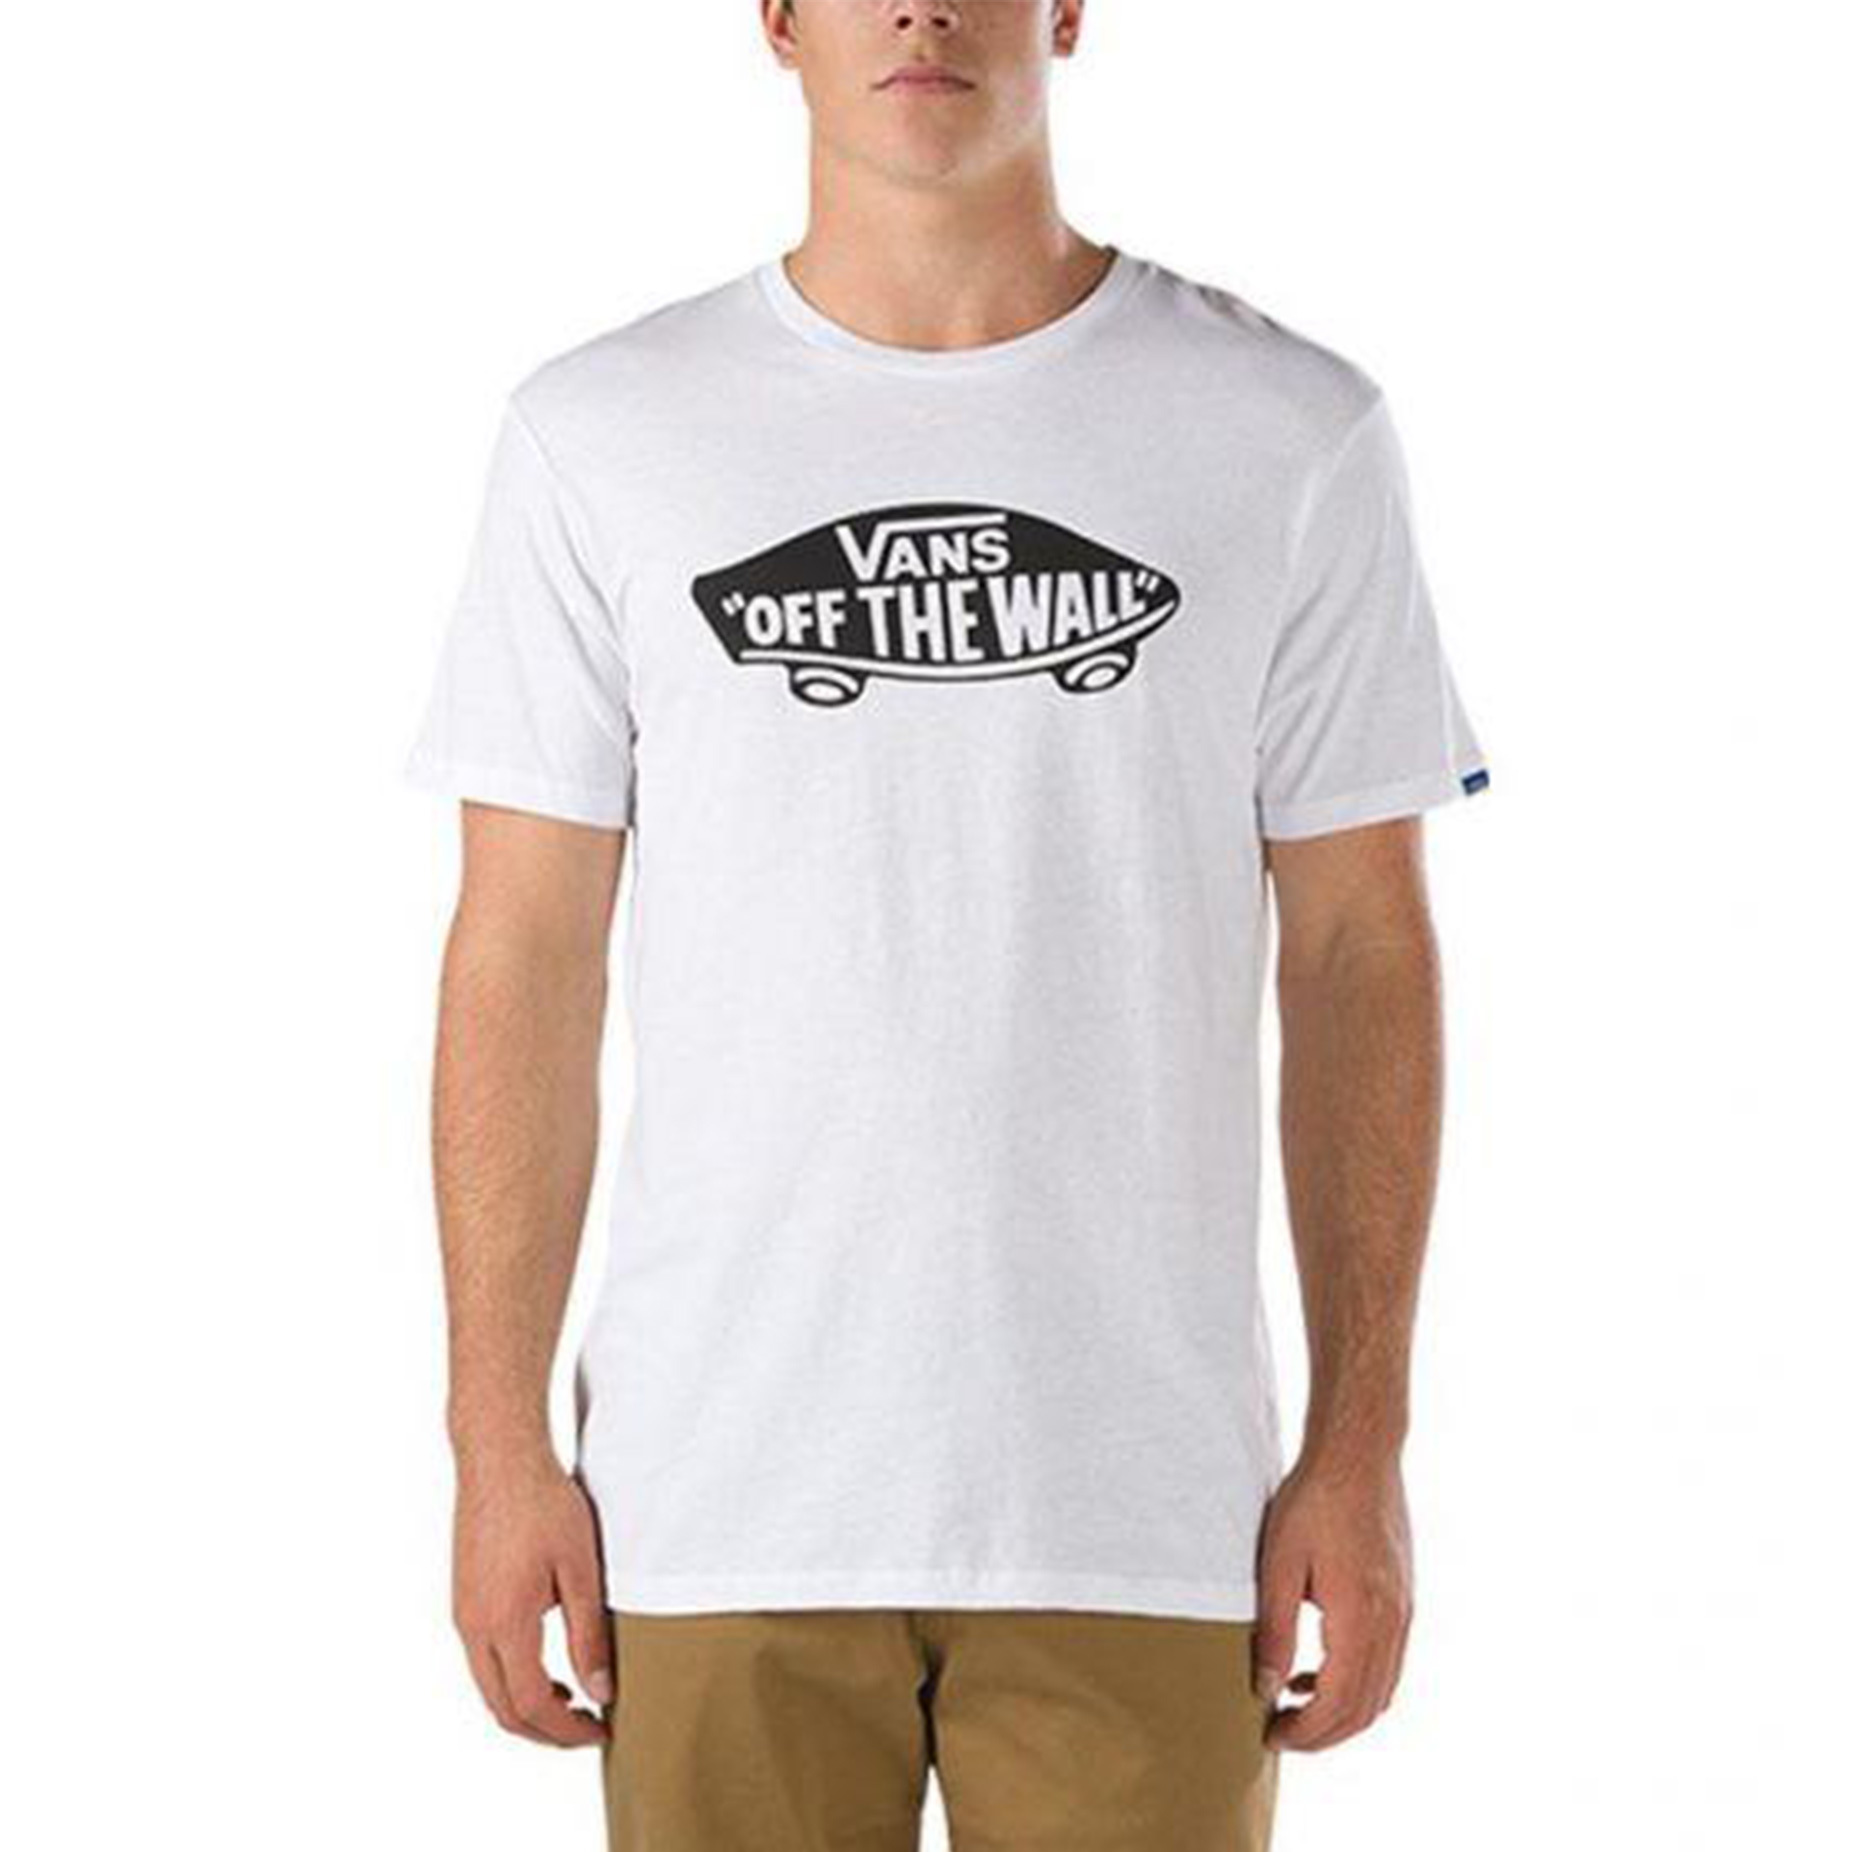 vans of the wall t shirt